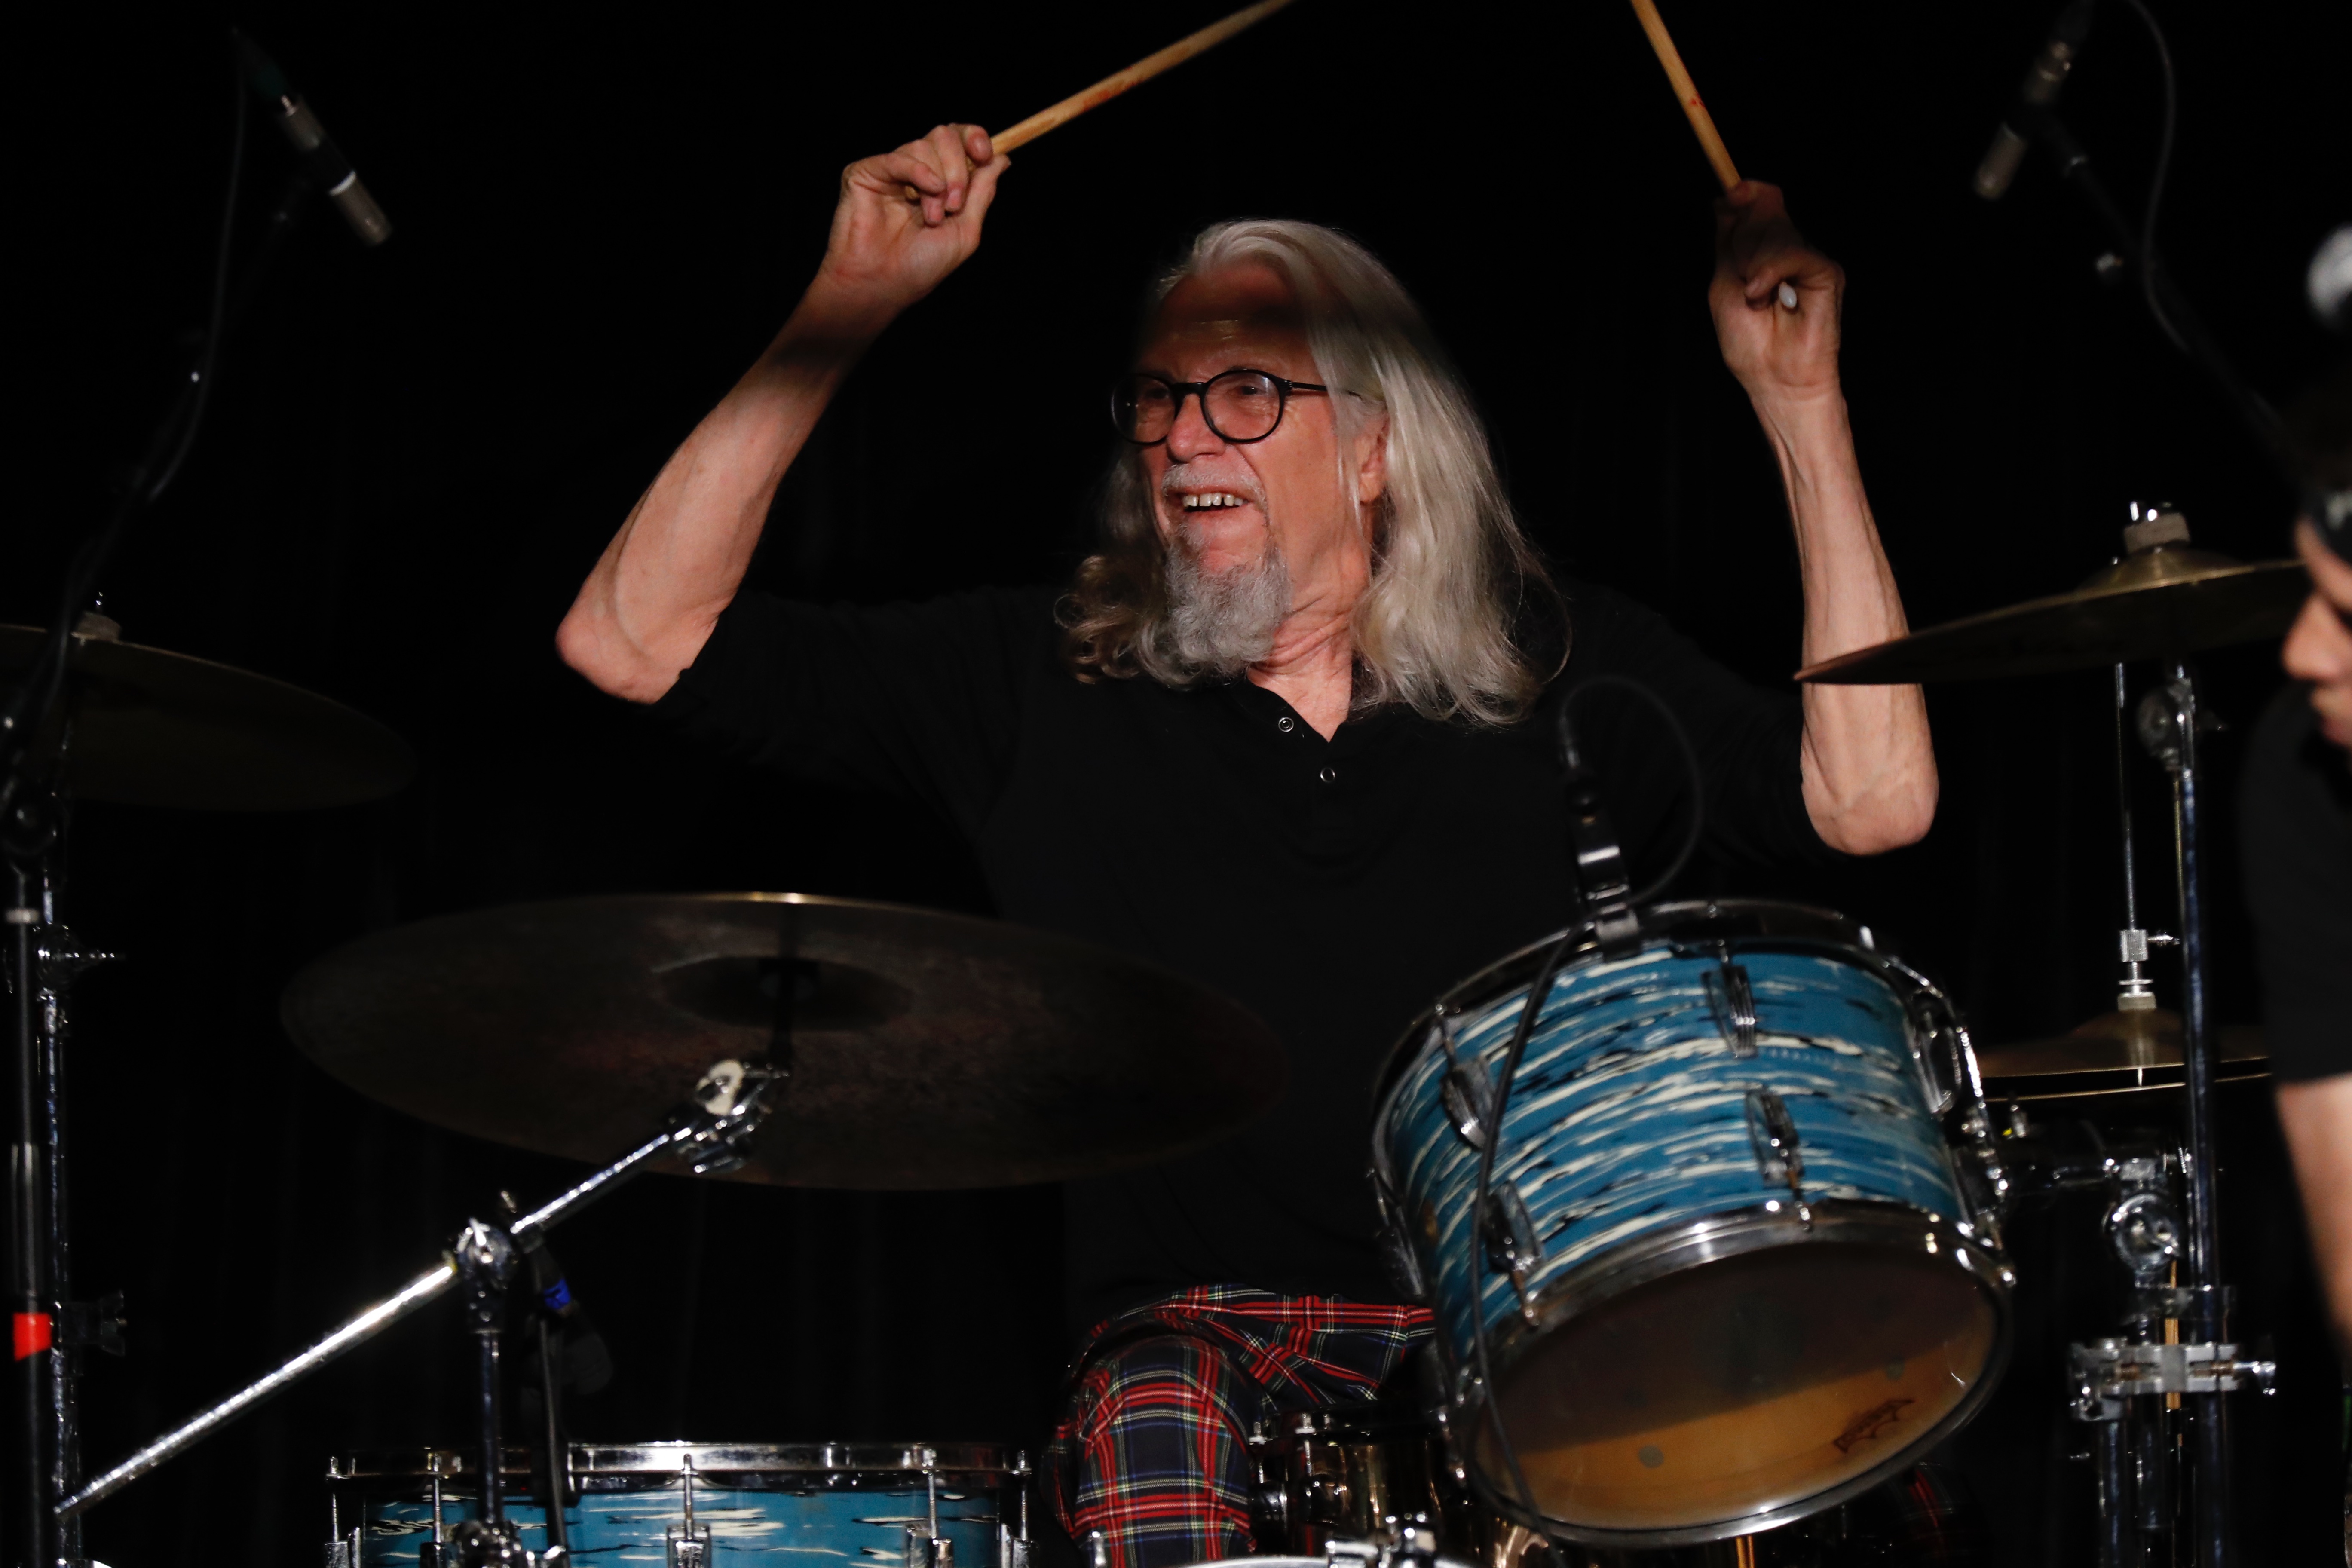 In 1979, Phil Jones was hired by Tom Petty and The Heartbreakers as a percussionist and toured with them from 1980 through 1984.